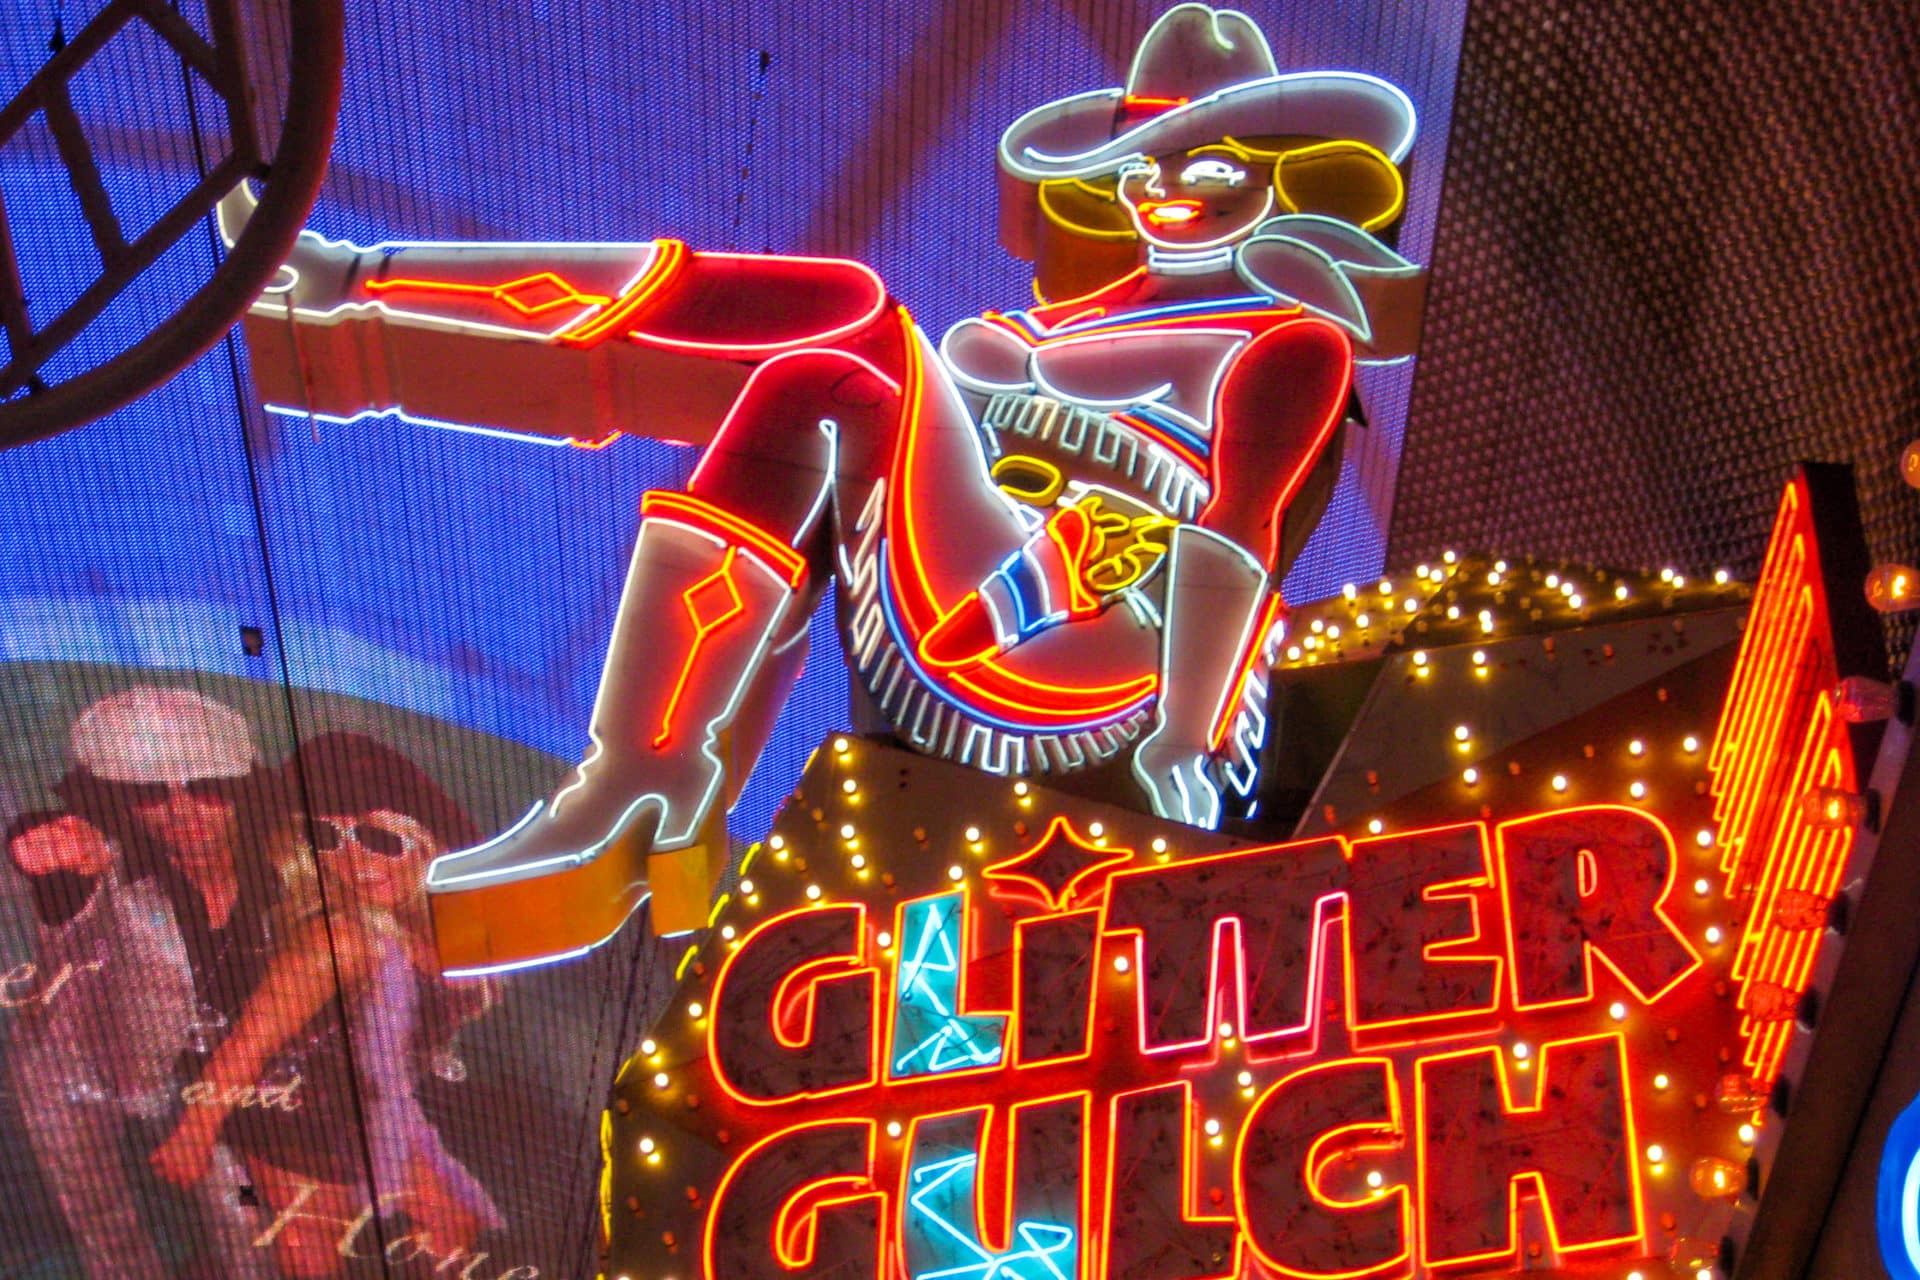 Here’s where to find the best neon signs across the U.S.